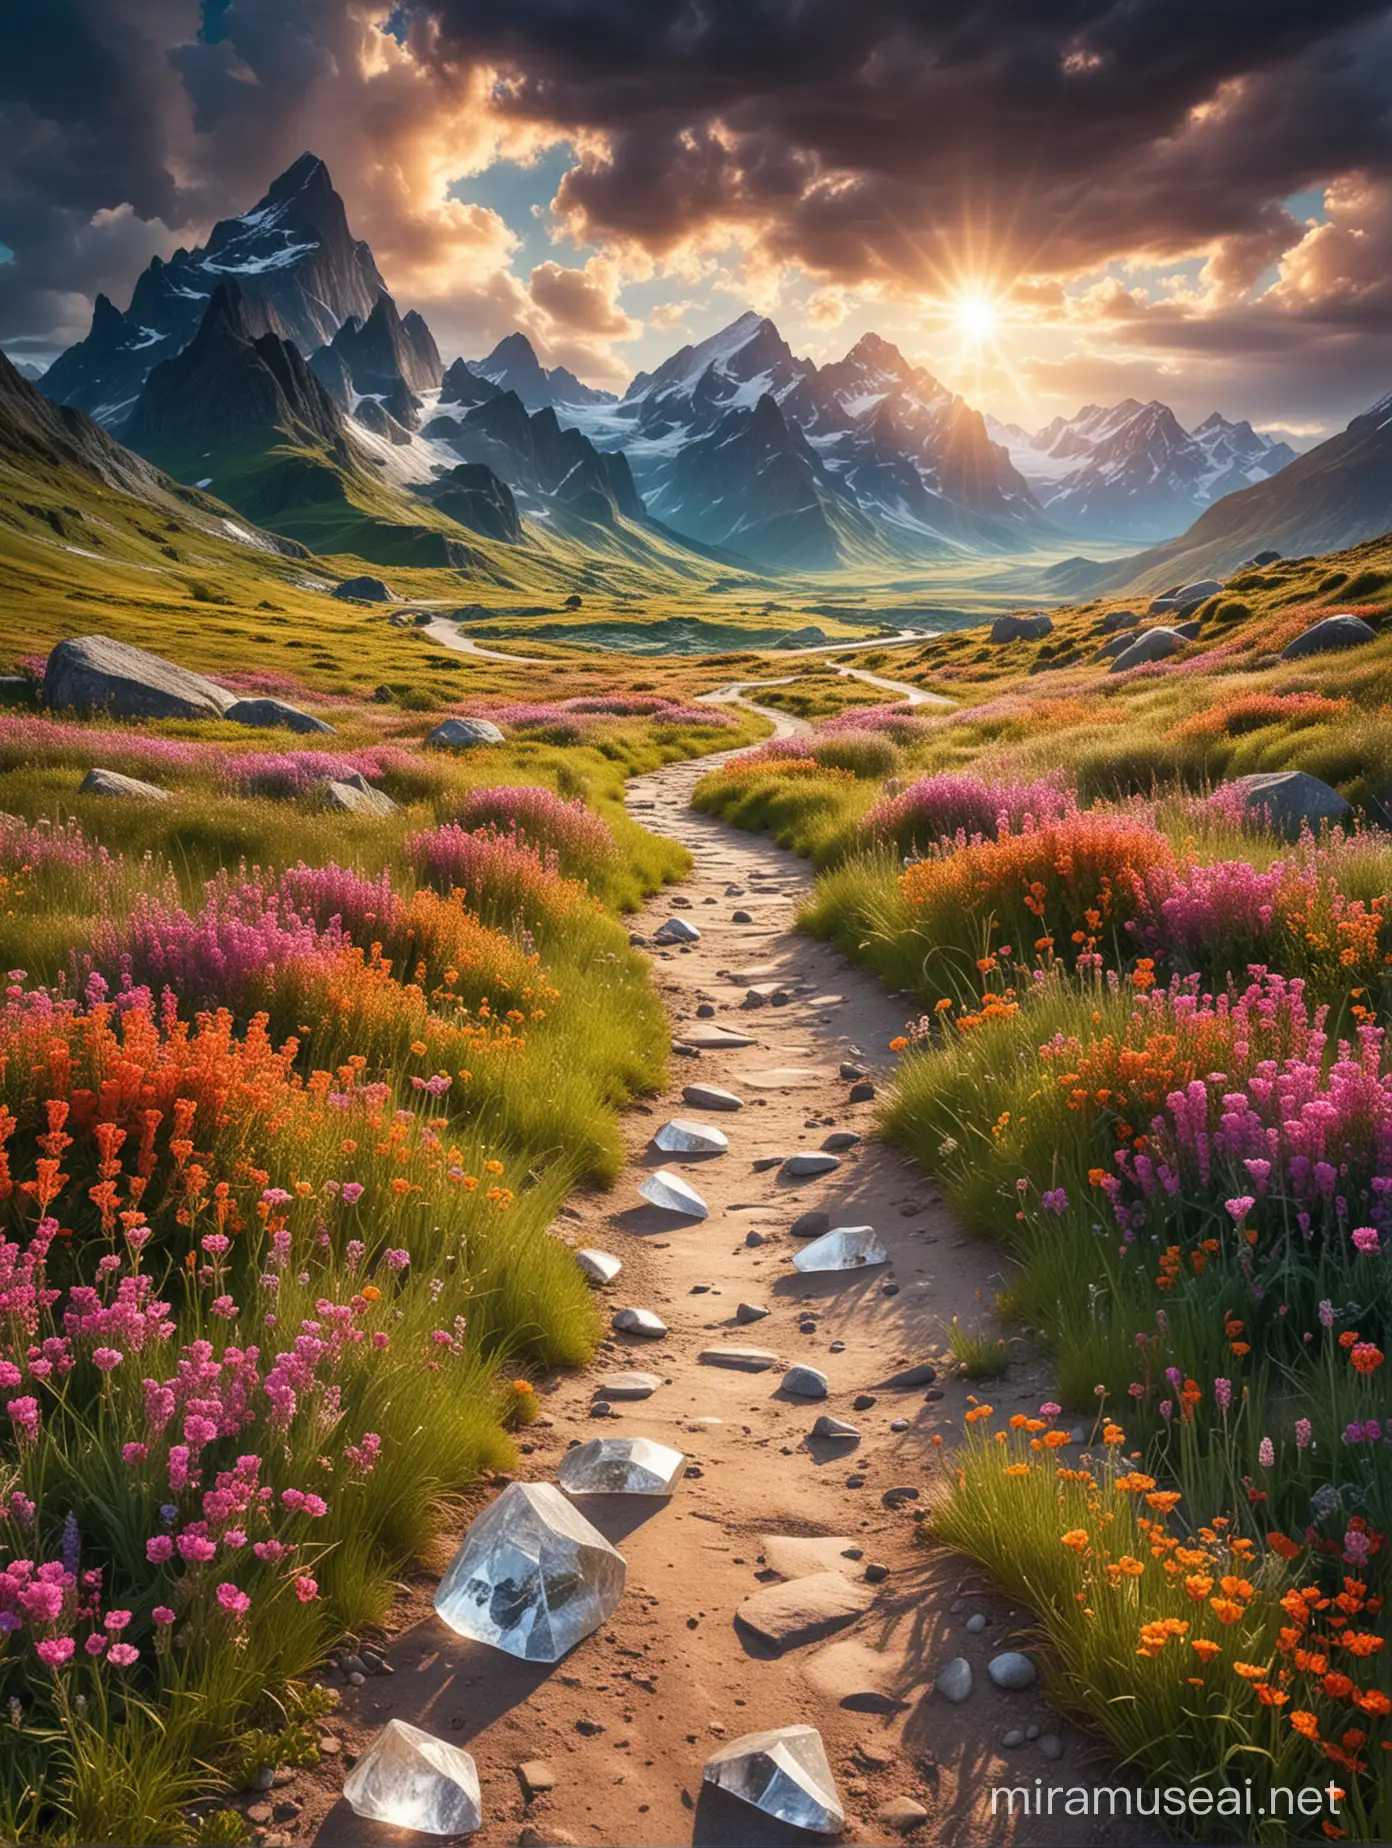 beautiful scene of a magical winding road leading to distant mountains  in the horizon with green grass, colorful  flowers and giant crystals on both sides reflecting the sunlight creating a breathtaking scene with vivid perfect light between the clouds
